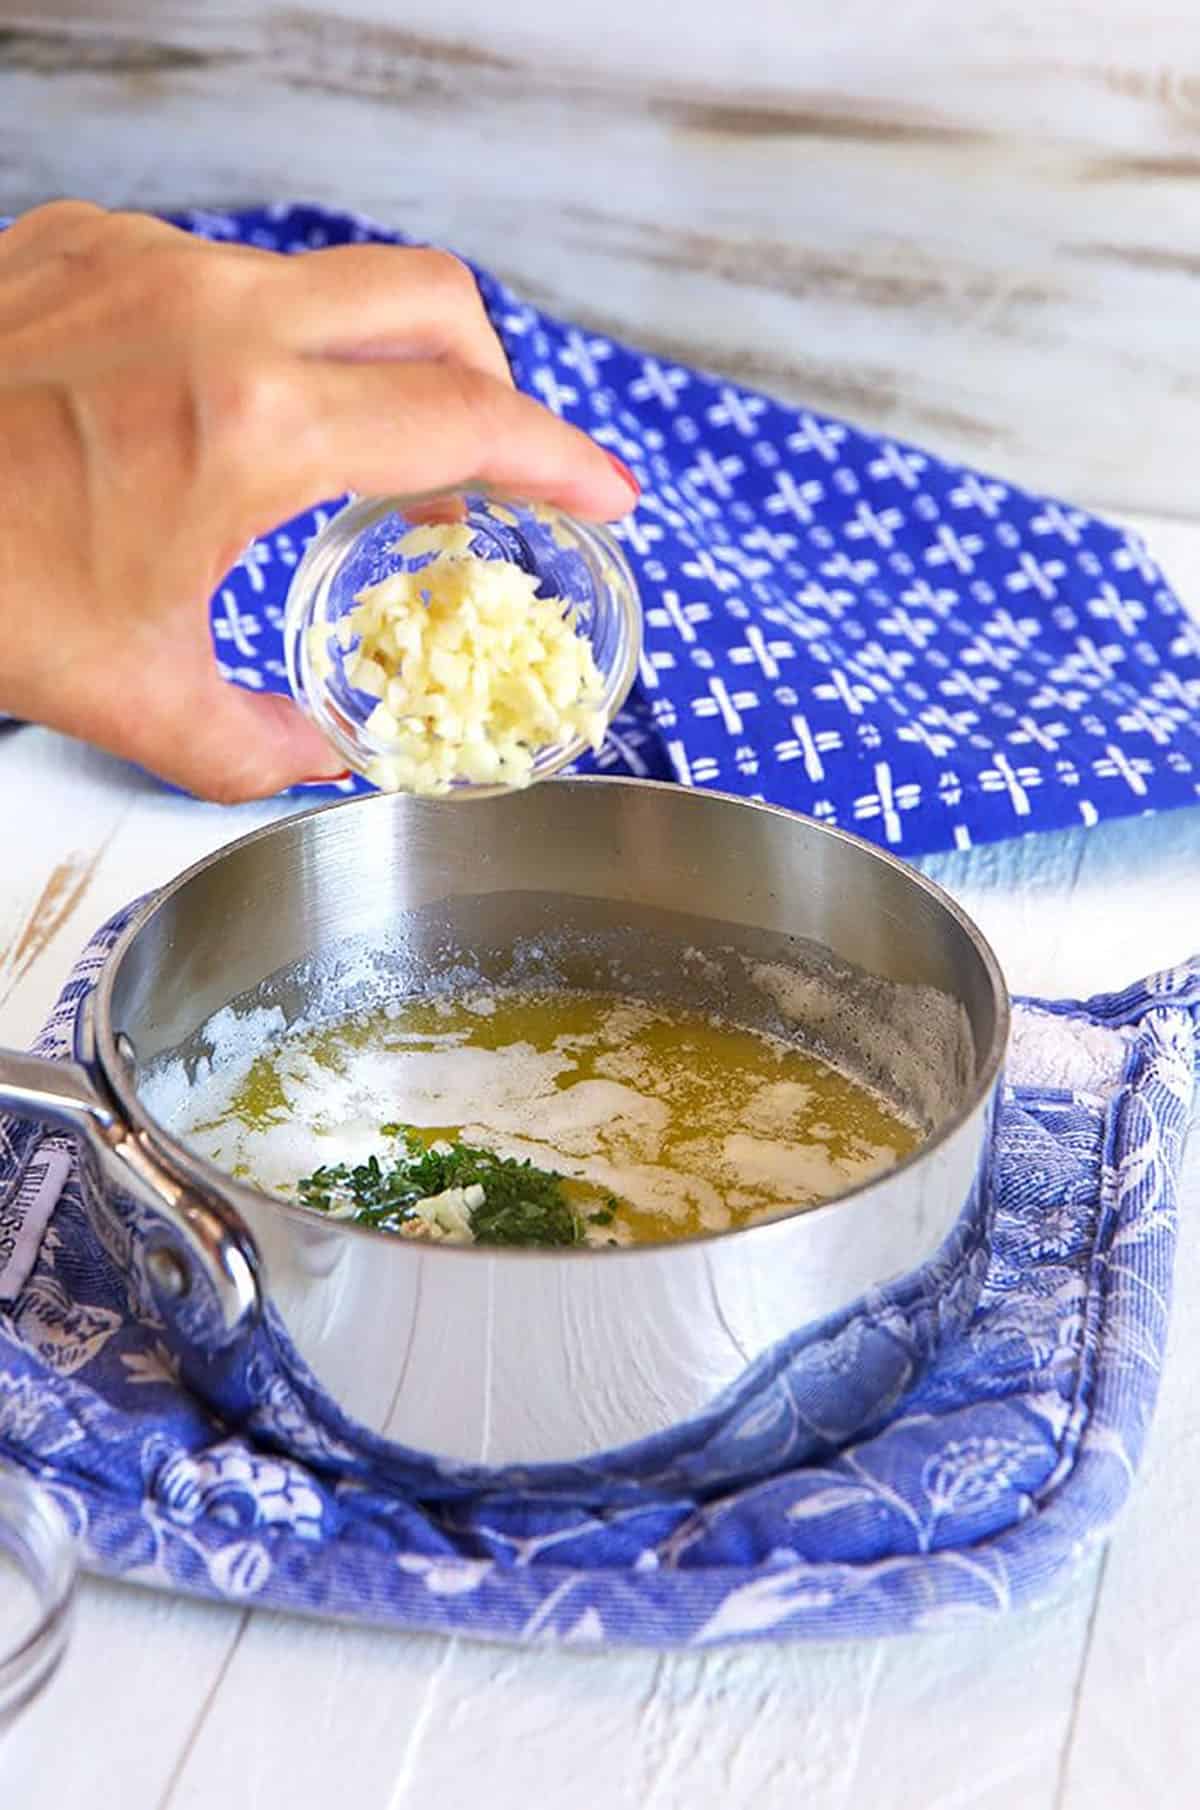 Garlic being poured into a saucepan of melted butter.